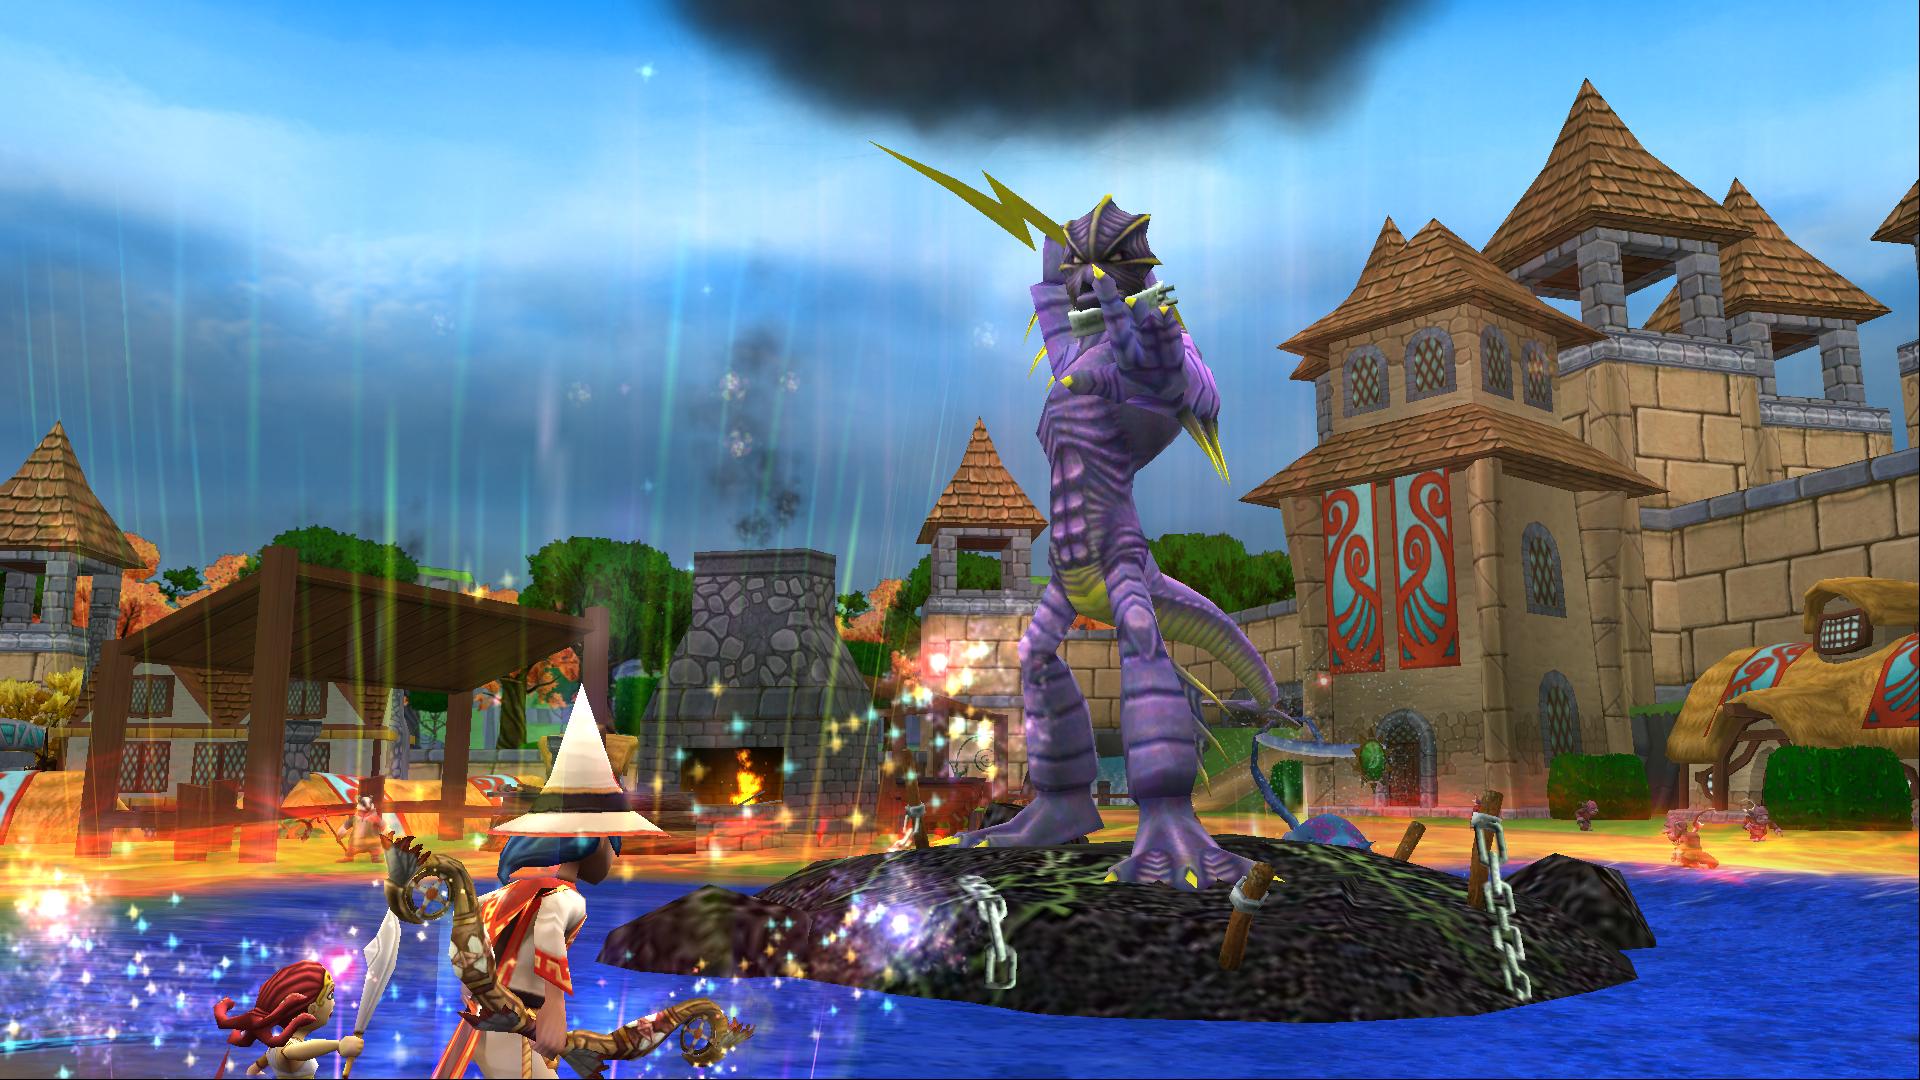 Is WIZARD101 Worth Playing in 2022?